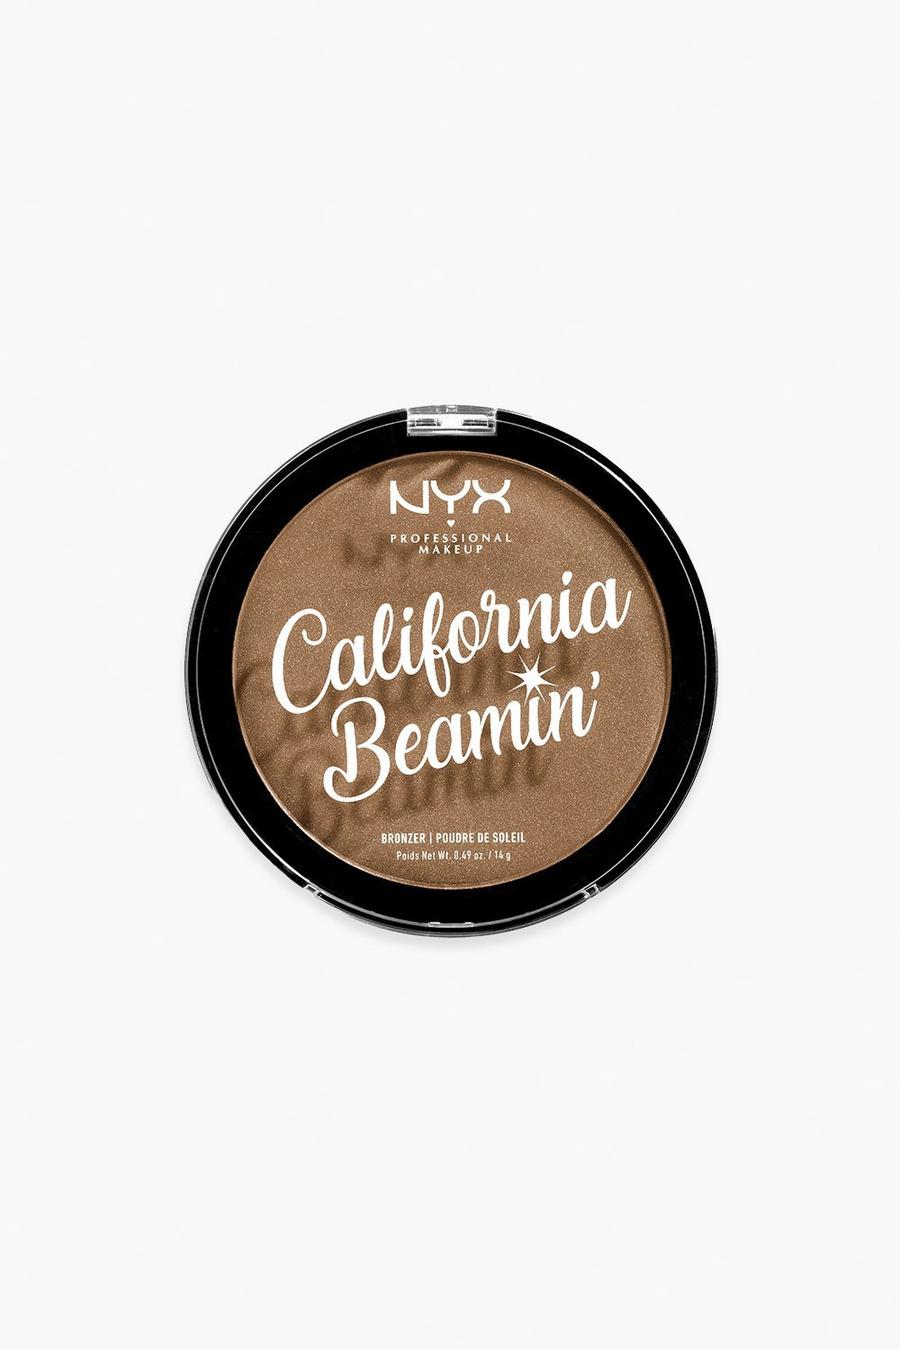 NYX Professional Makeup - Poudre bronzante visage et corps - California Beamin’, 03 sunset vibes image number 1